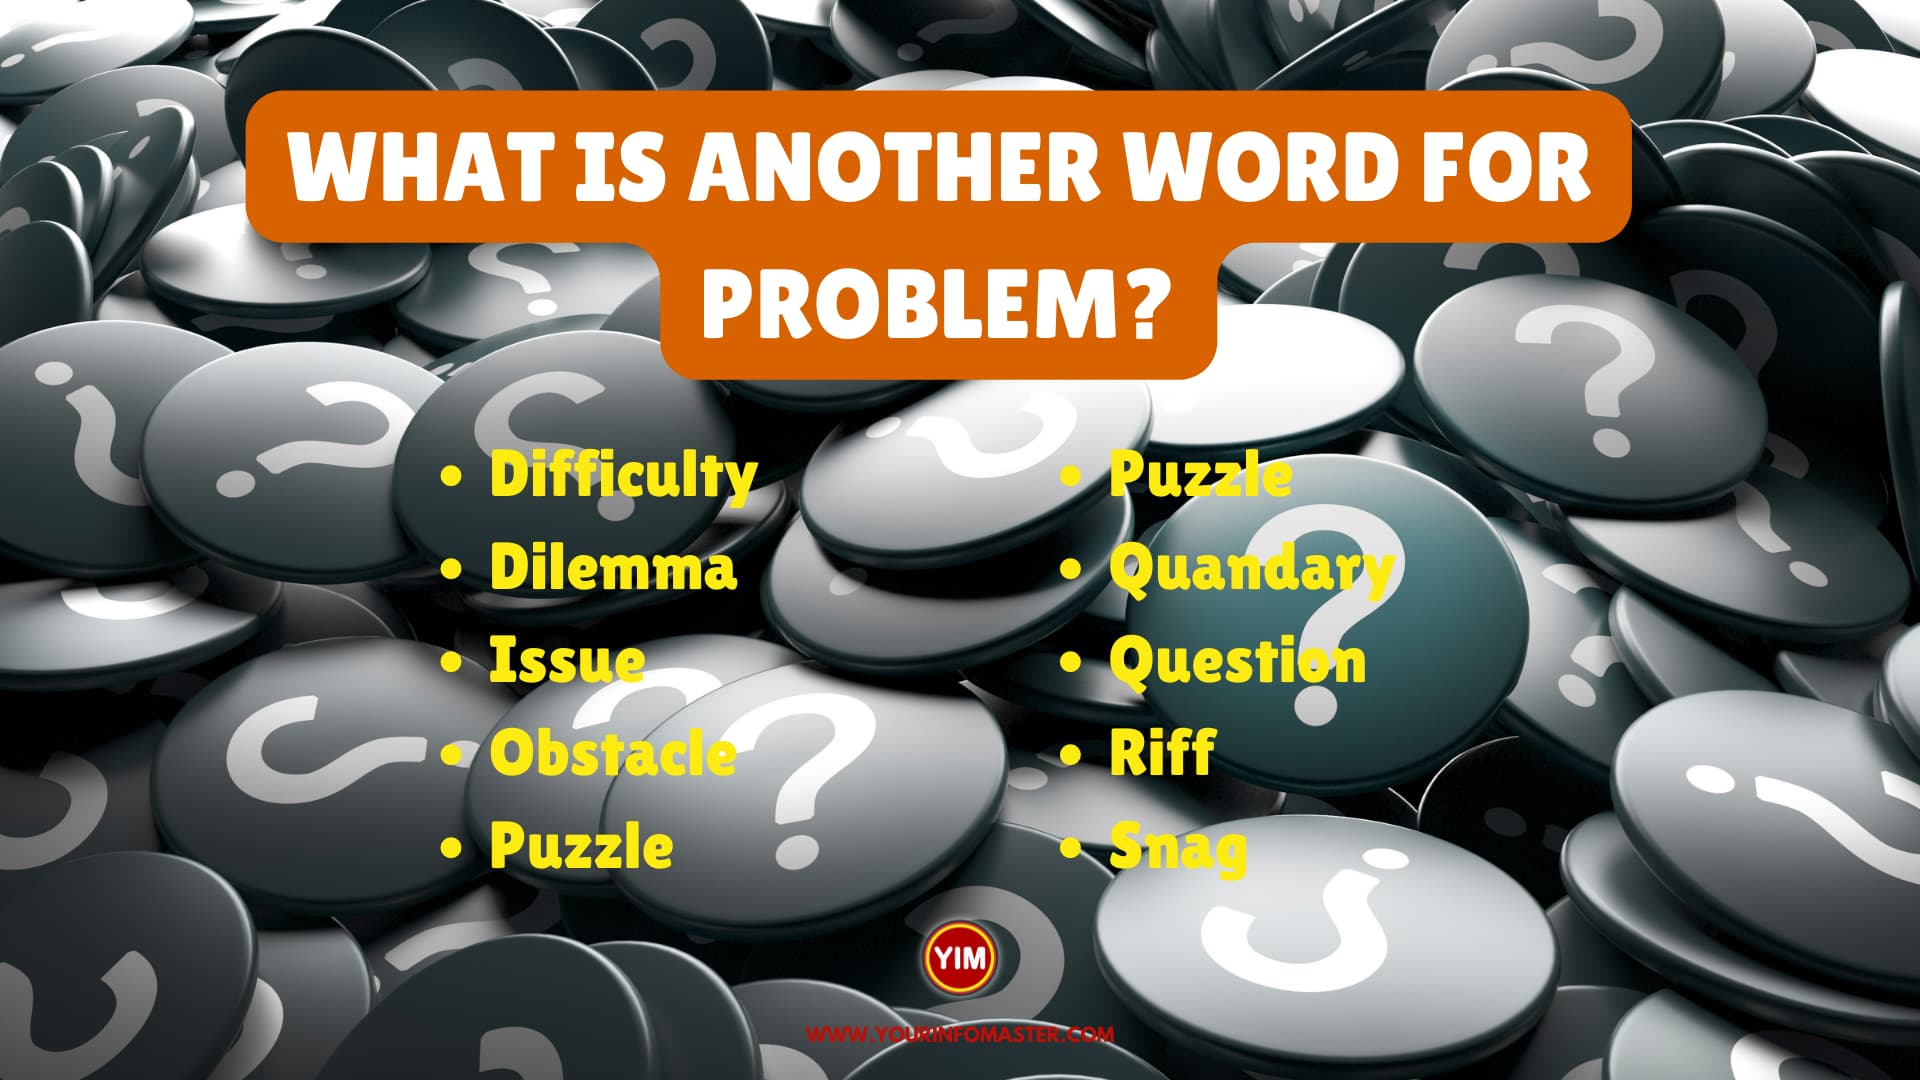 What is another word for Problem